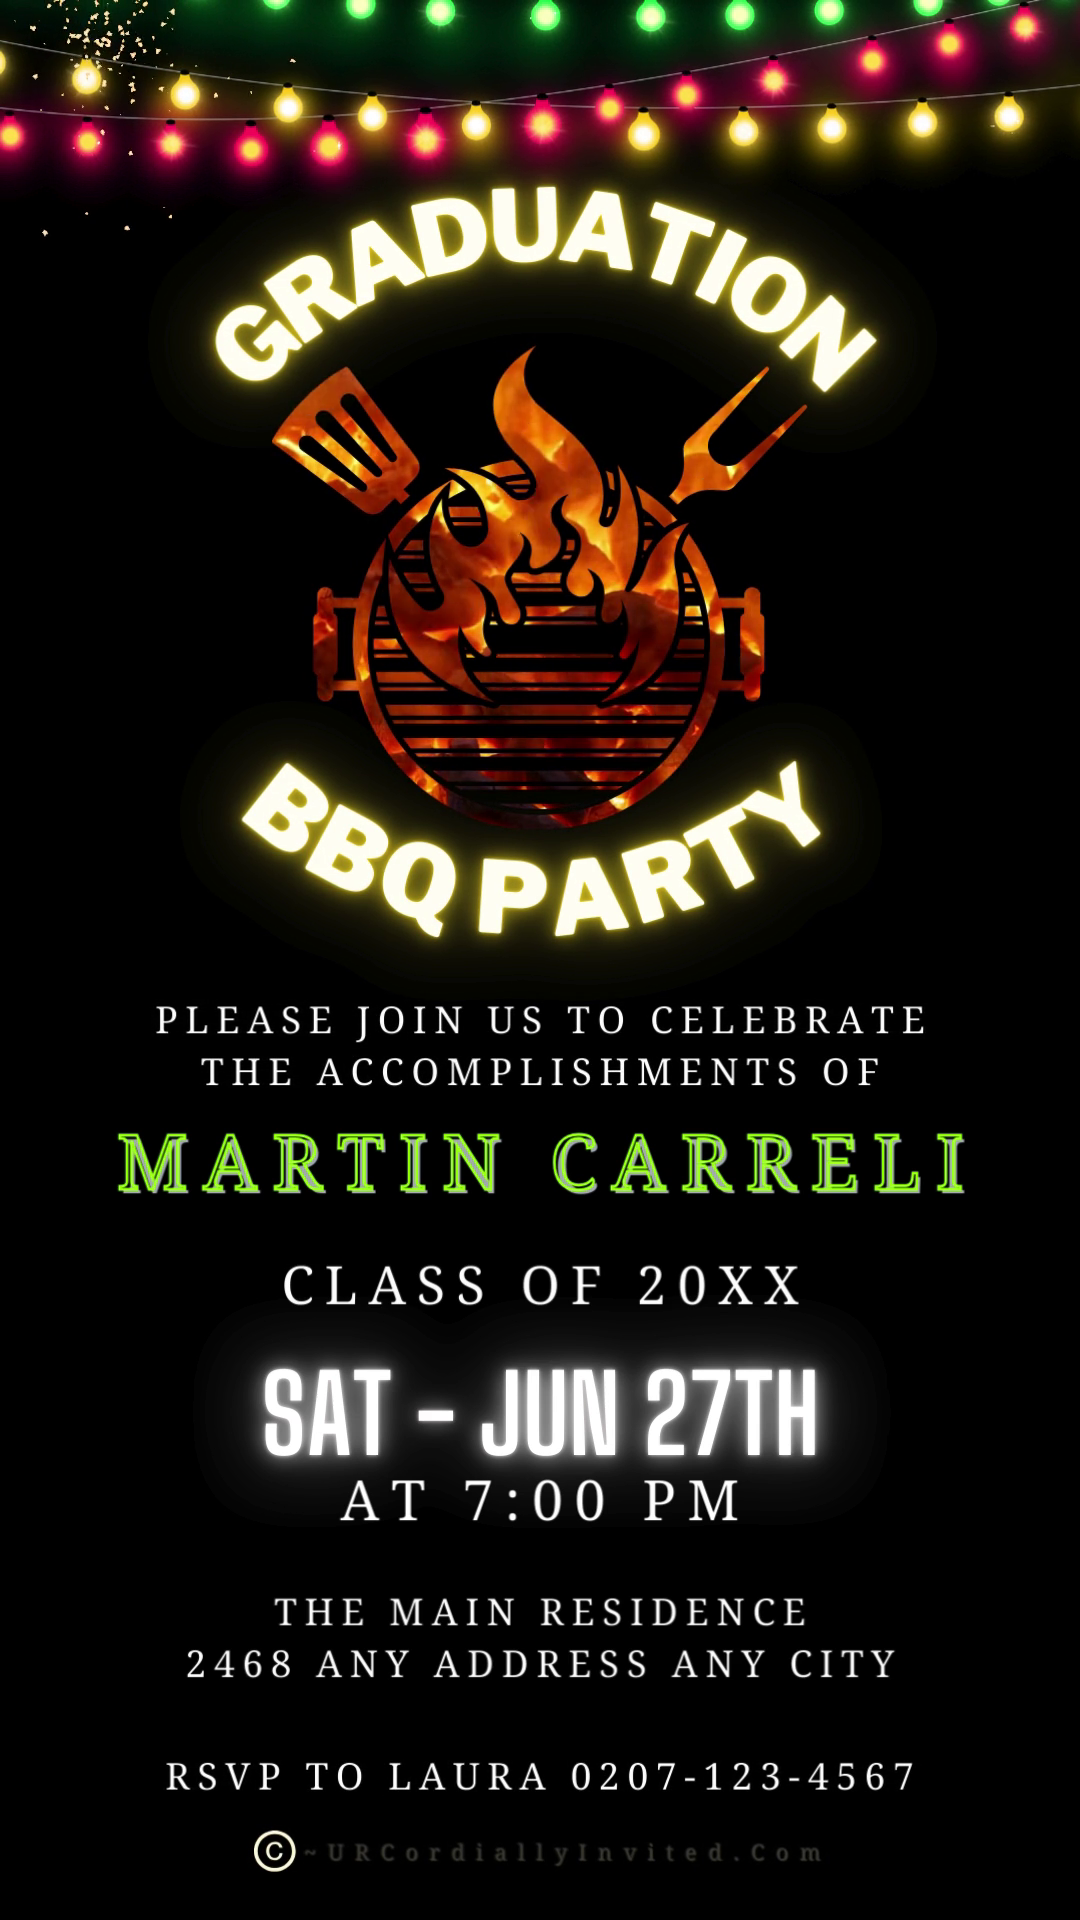 BBQ Grill Backyard Party | Graduation Video Invitation featuring customizable text, a barbecue grill logo, and a spatula icon. Ideal for digital sharing via smartphone.